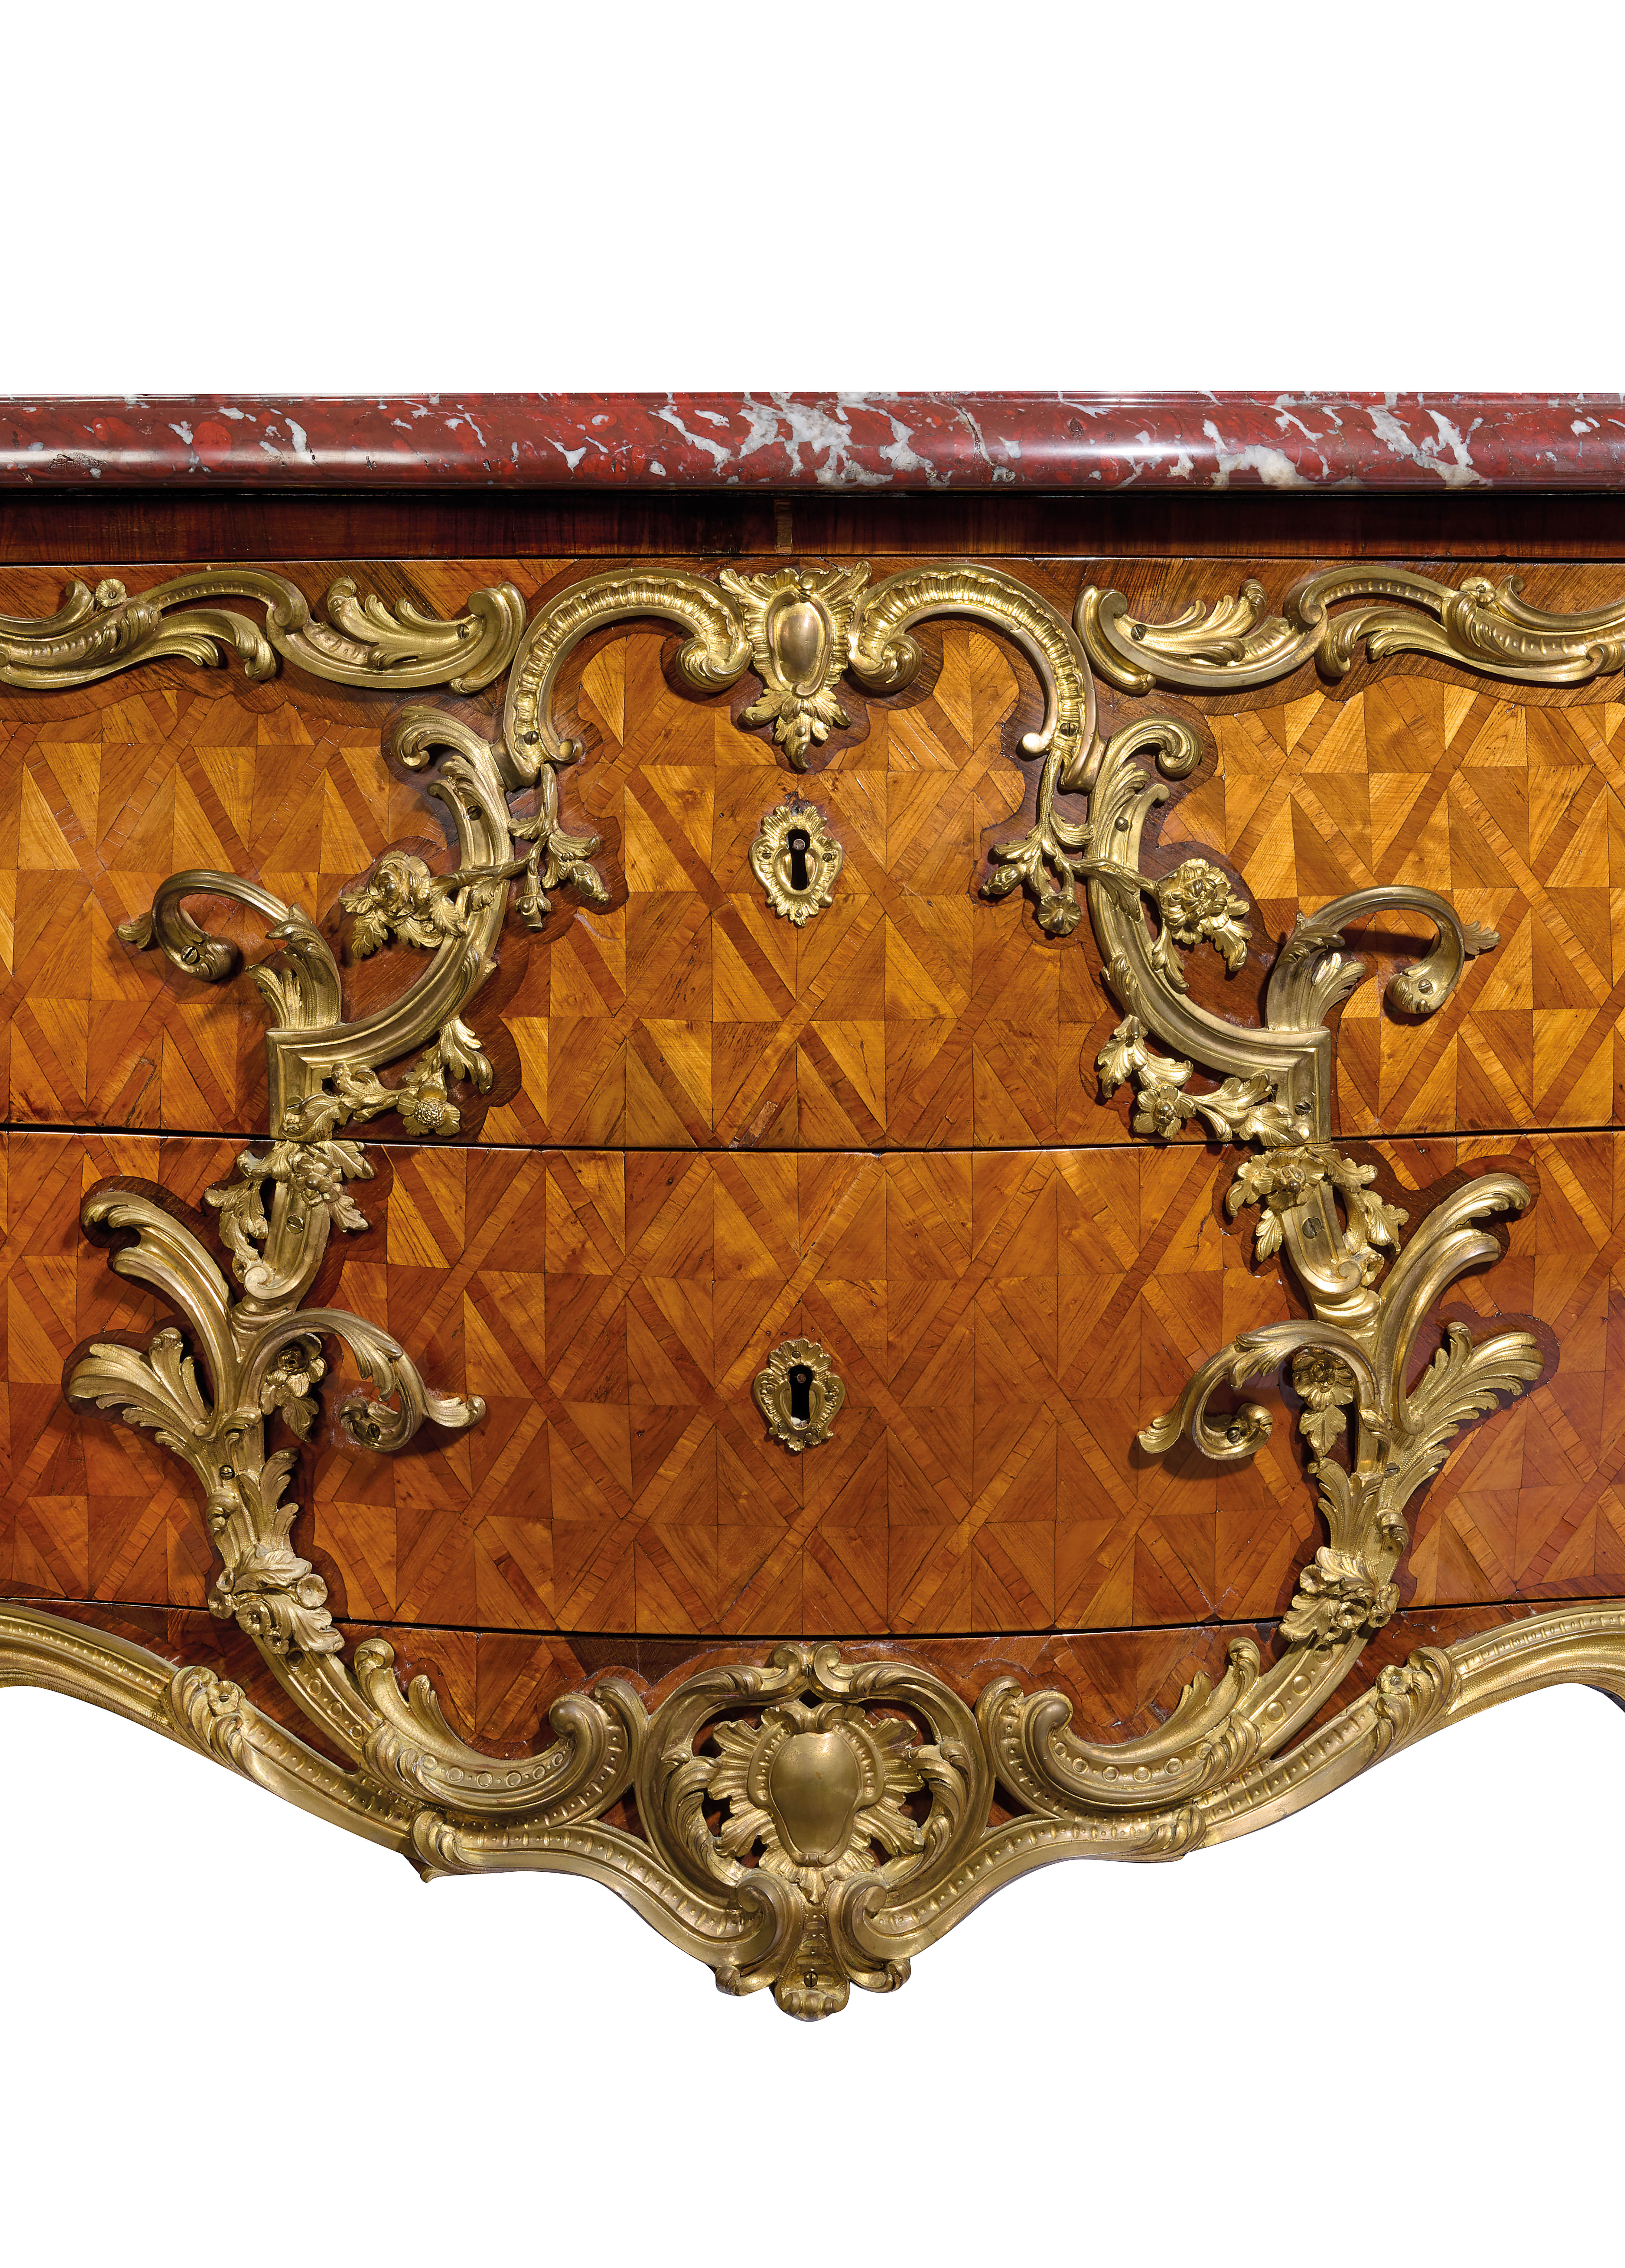 A FINE FRENCH LOUIS XV KINGWOOD AND ORMOLU MOUNTED SERPENTINE BOMBE COMMODE ATTRIBUTED TO GILLES - Image 2 of 36